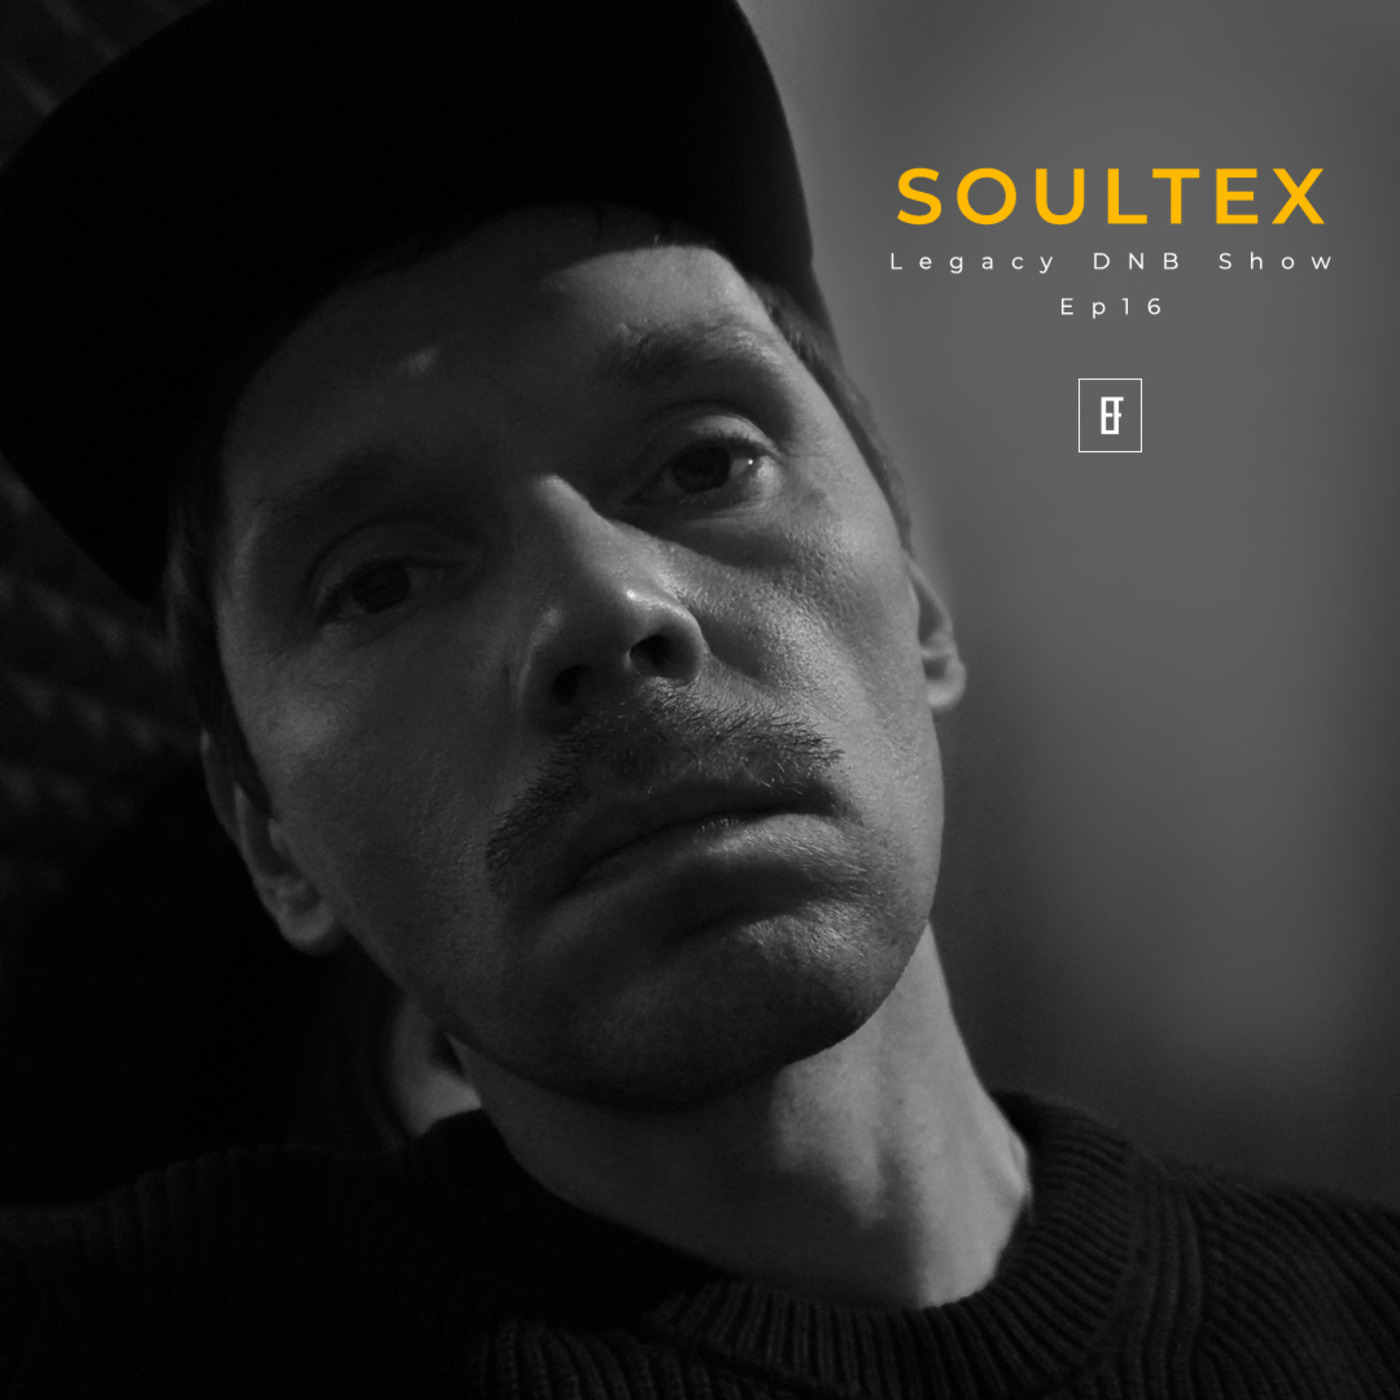 Soultex - Legacy Beijing DNB Show Ep16 // East Forms Drum & Bass